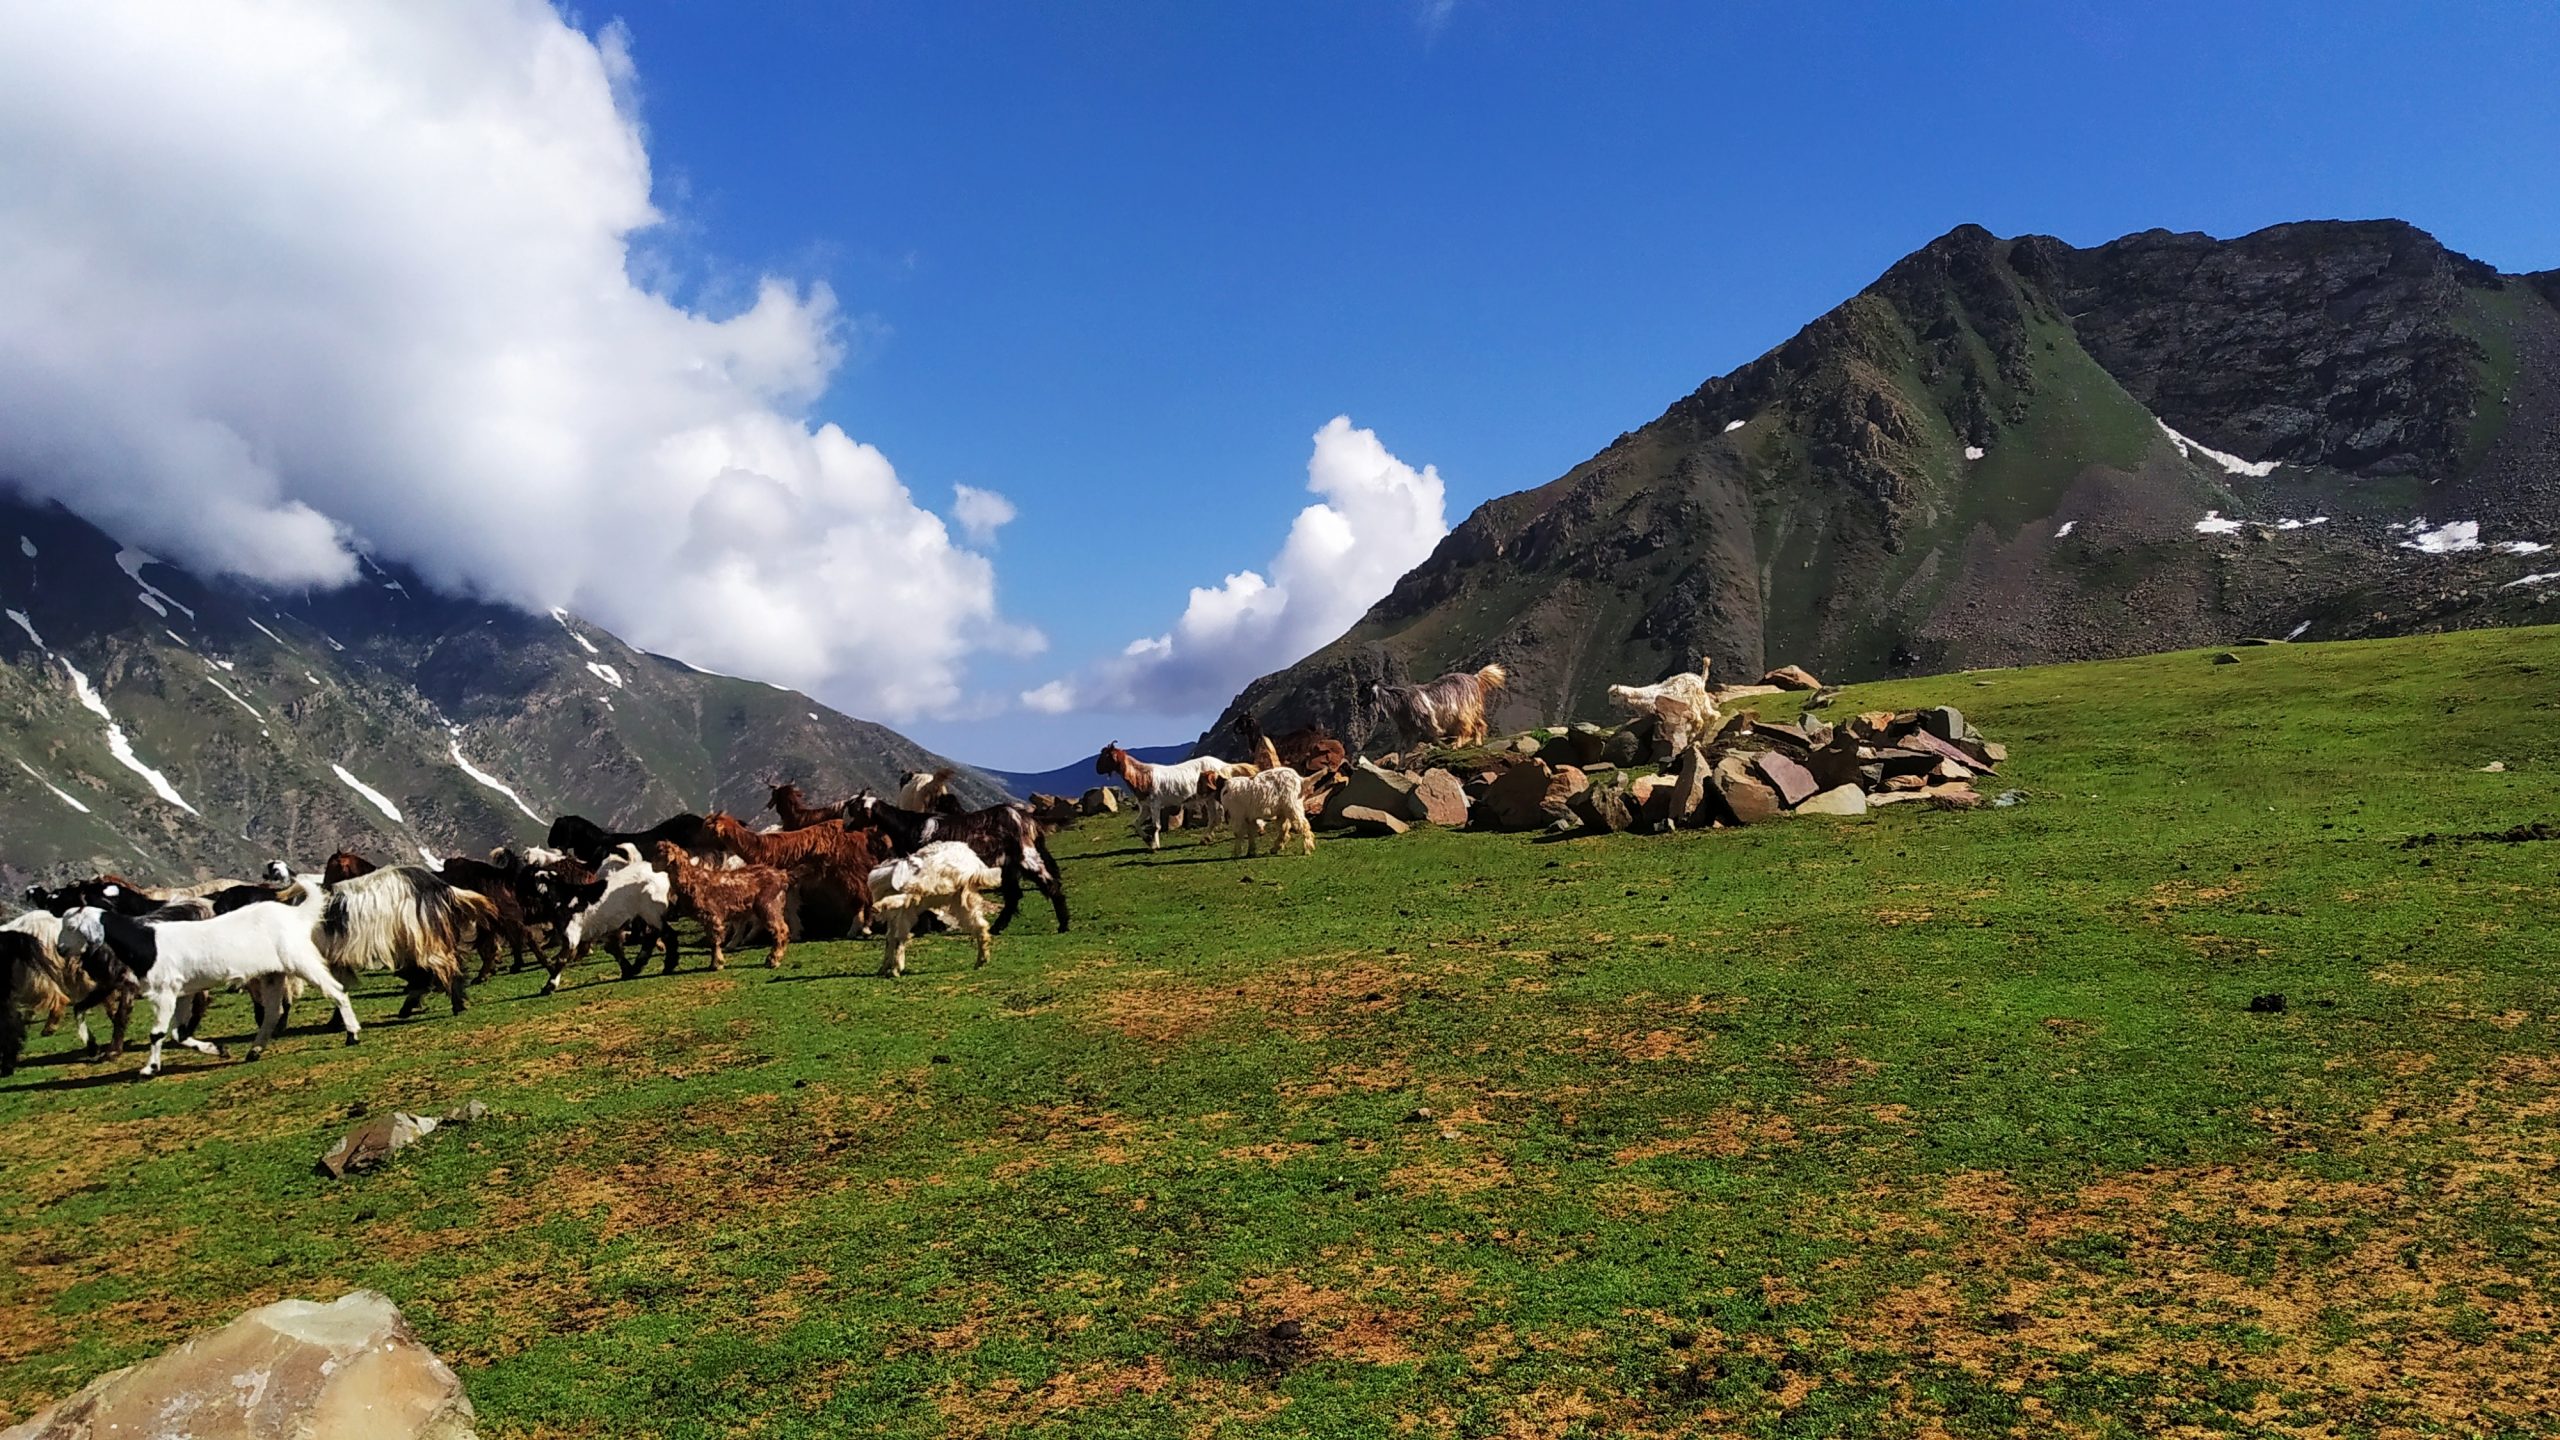 Group of goats grazing in PIr Panjal ranges.